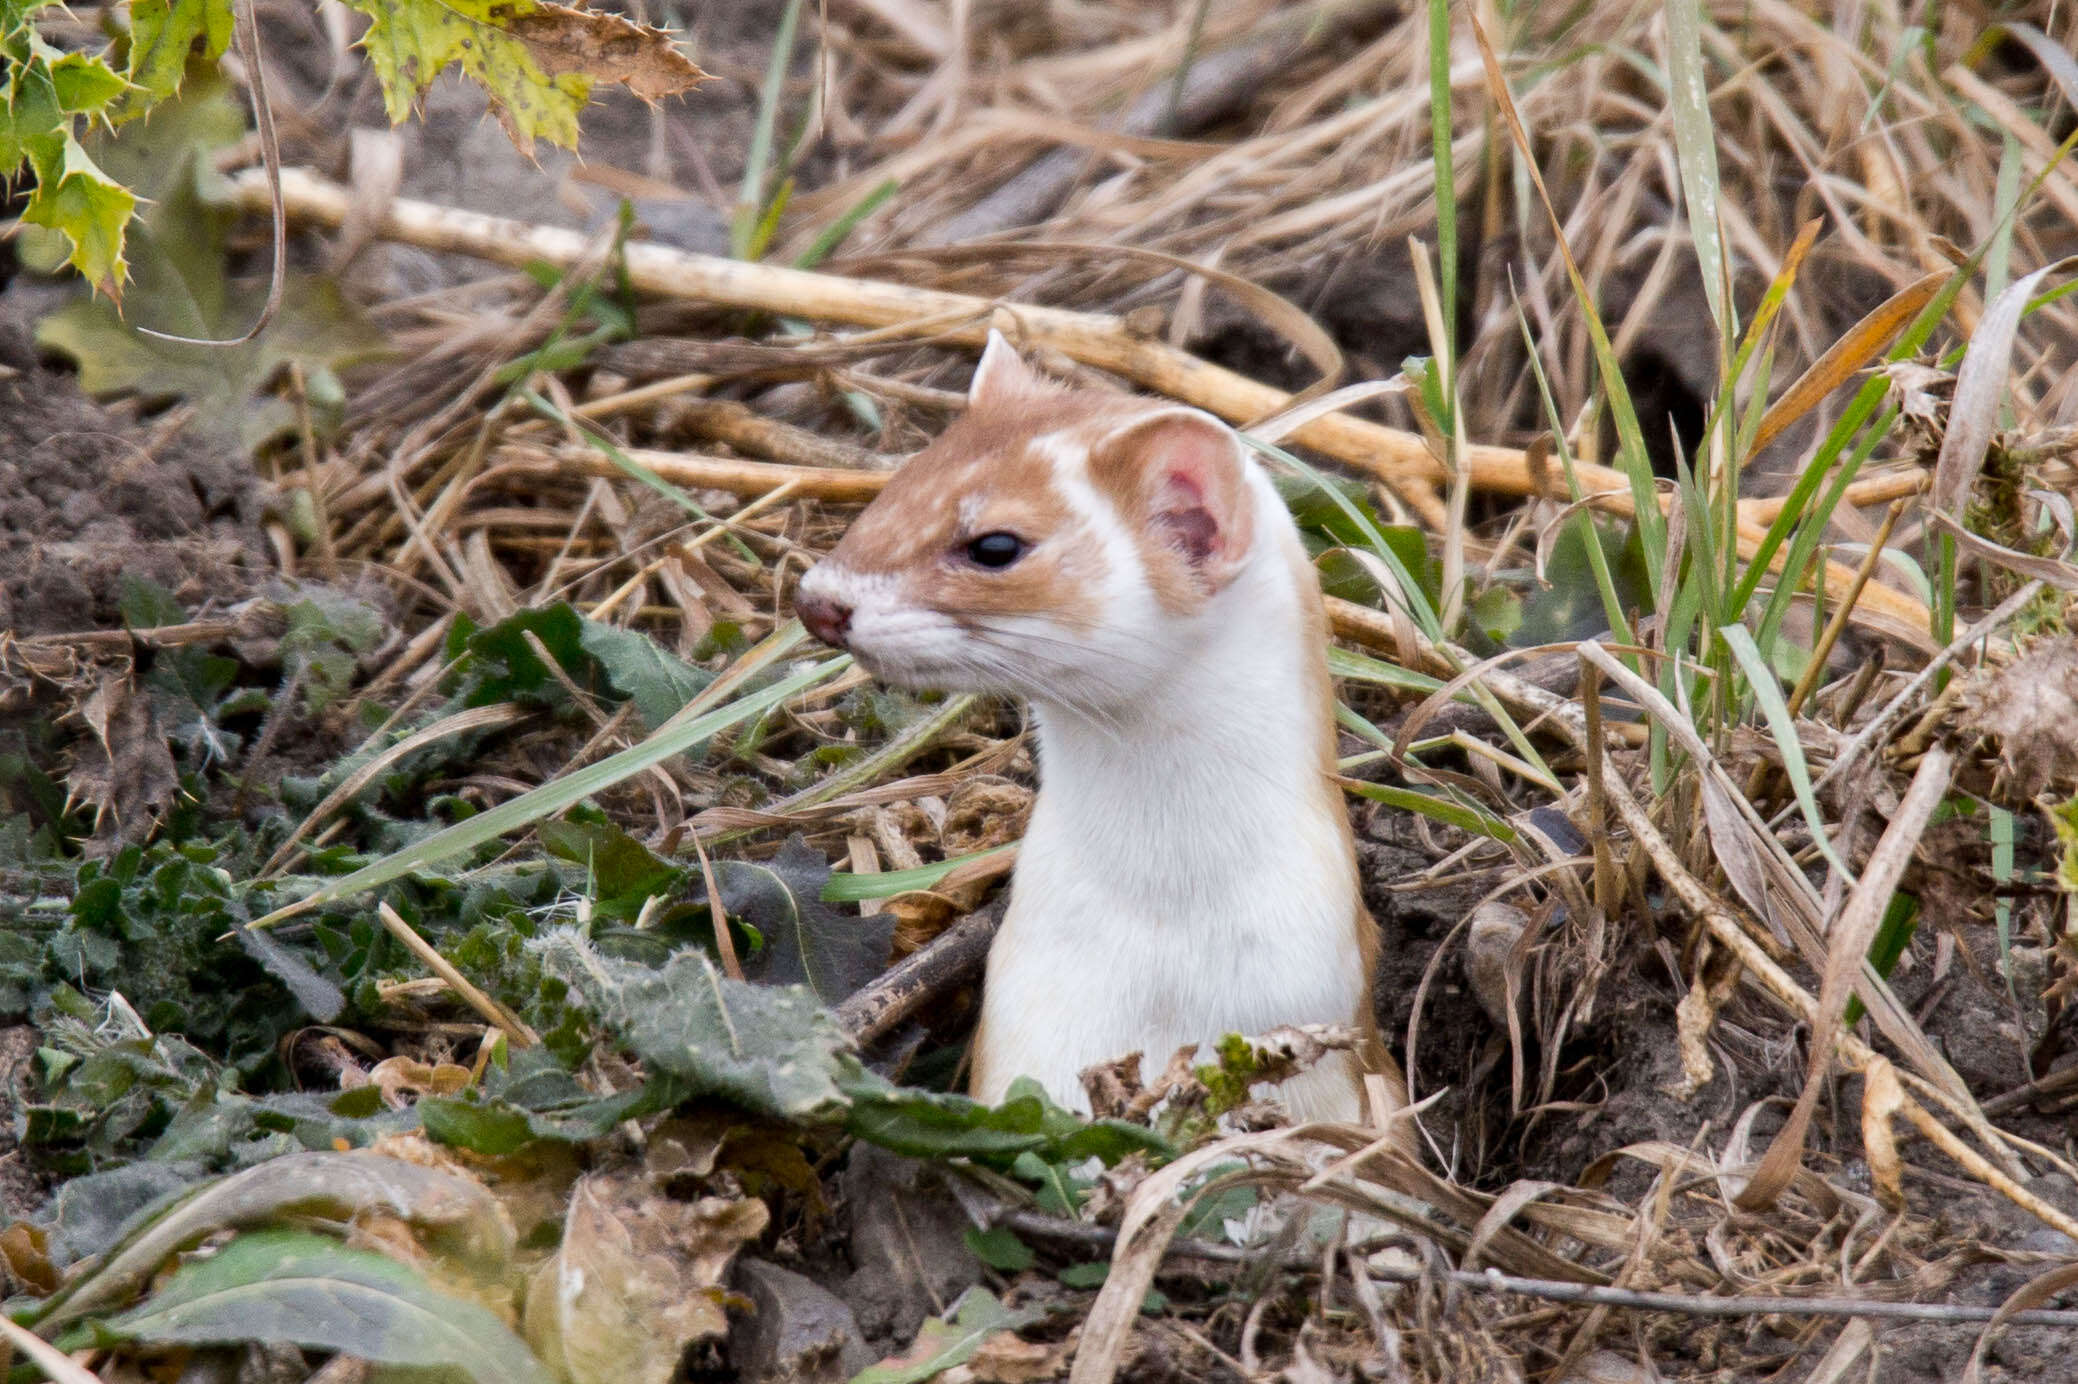 Image of Long-tailed Weasel